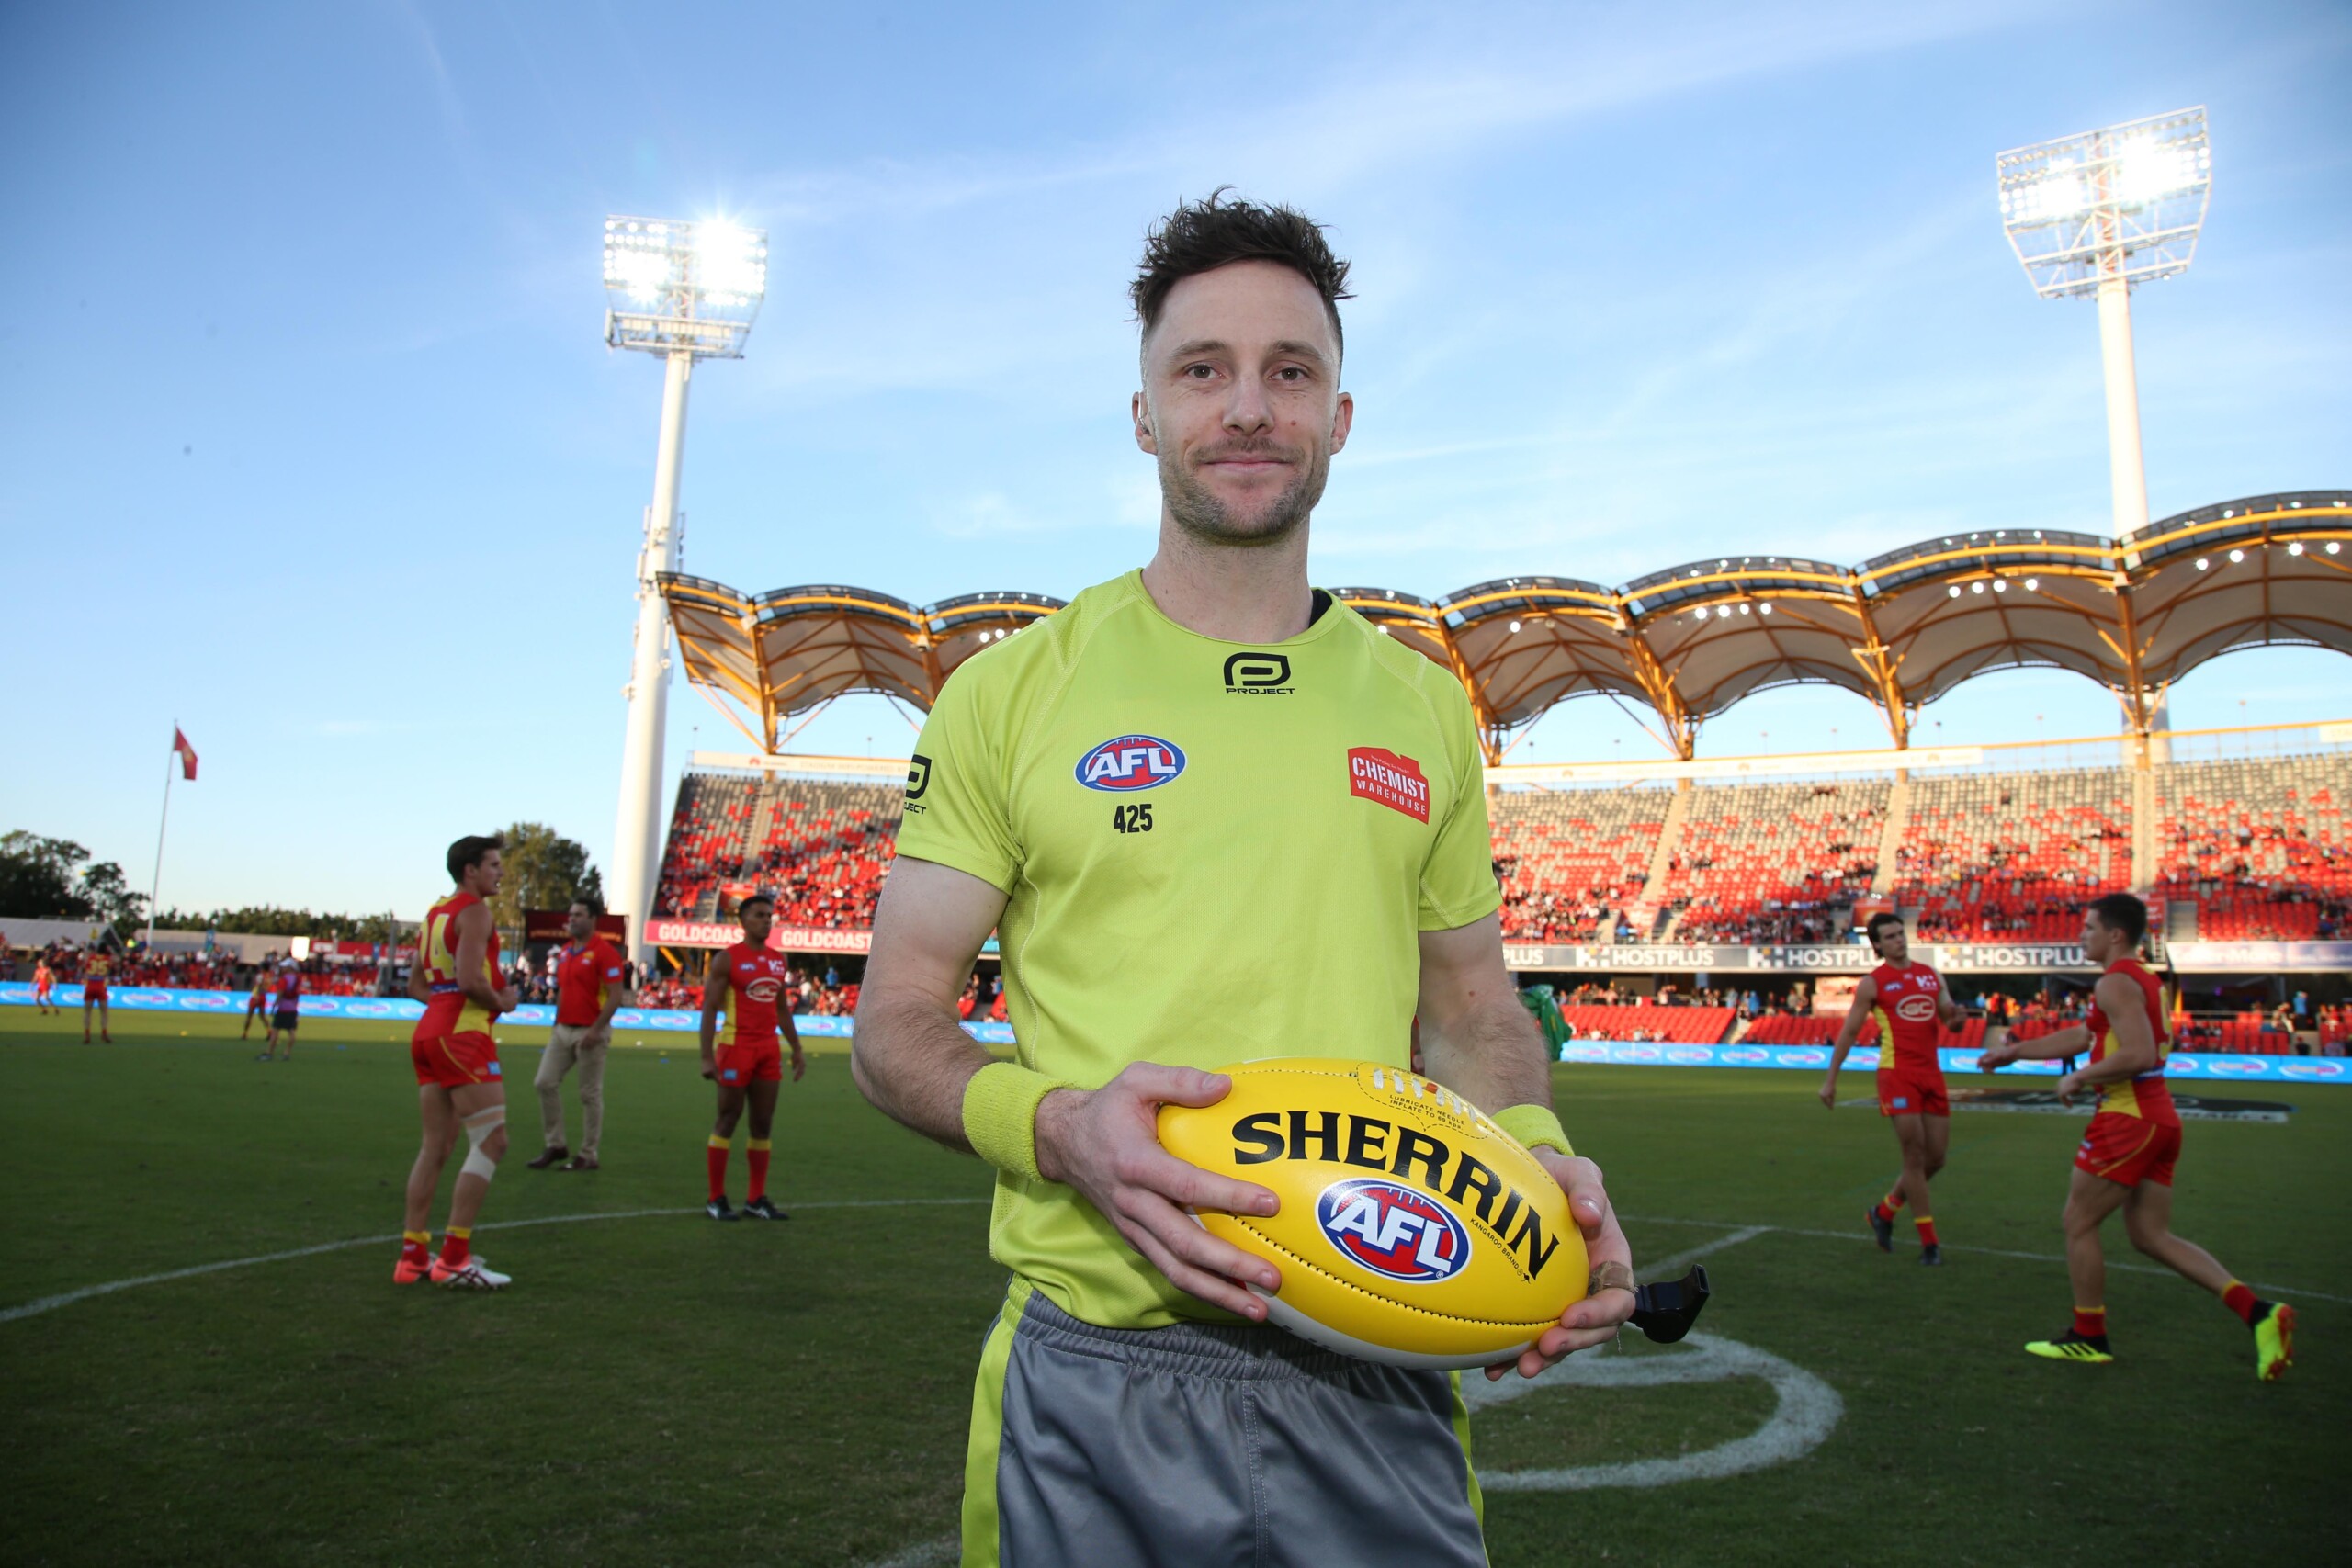 GOLD COAST, AUSTRALIA - JUNE 16: during the 2018 AFL round 13 match between the Gold Coast Suns and the St Kilda Saints at Metricon Stadium on June 16, 2018 in the Gold Coast, Australia. (Photo by Jason O'Brien/AFL Media)